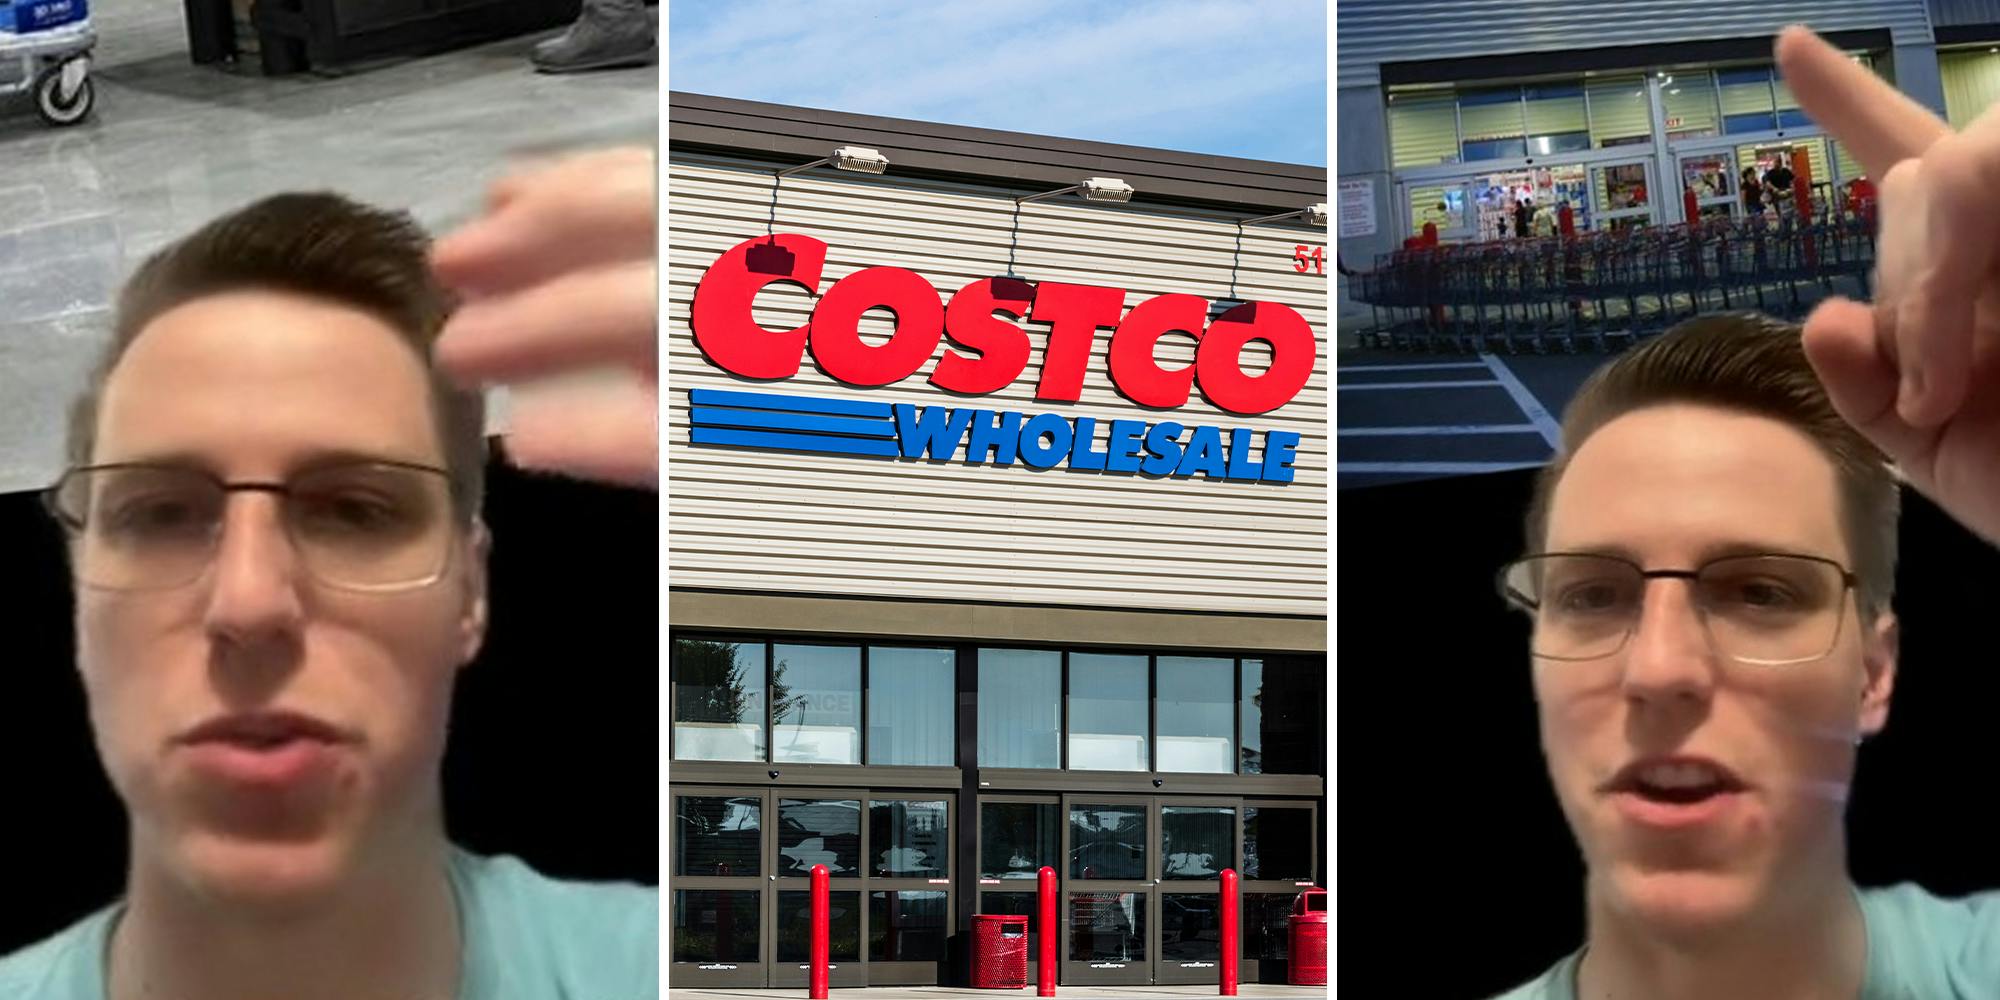 Costco shopper returns playground set from 2008 because his ‘kids grew up’.